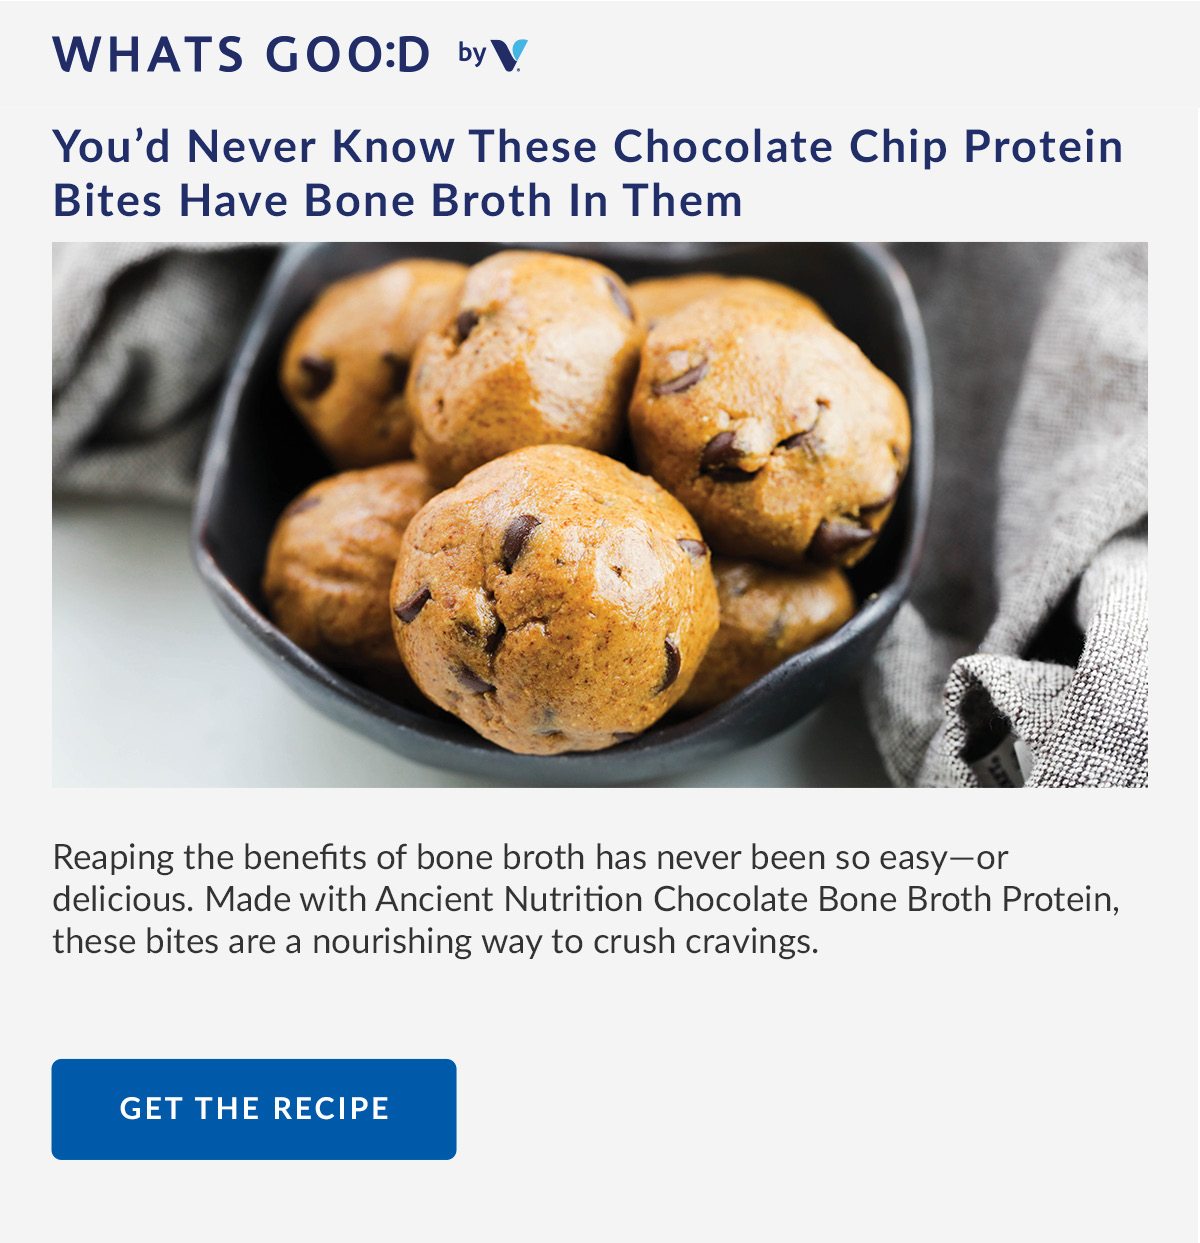 WHATS GOO:D | You'd Never Know These Chocolate Chip Protein Bites Have Bone Broth In Them | Reaping the benefits of bone broth has never been so easy-or delicious. Made with Ancient Nutrition Chocolate Bone Broth Protein, these bites are a nourishing way to crush cravings. | GET THE RECIPE